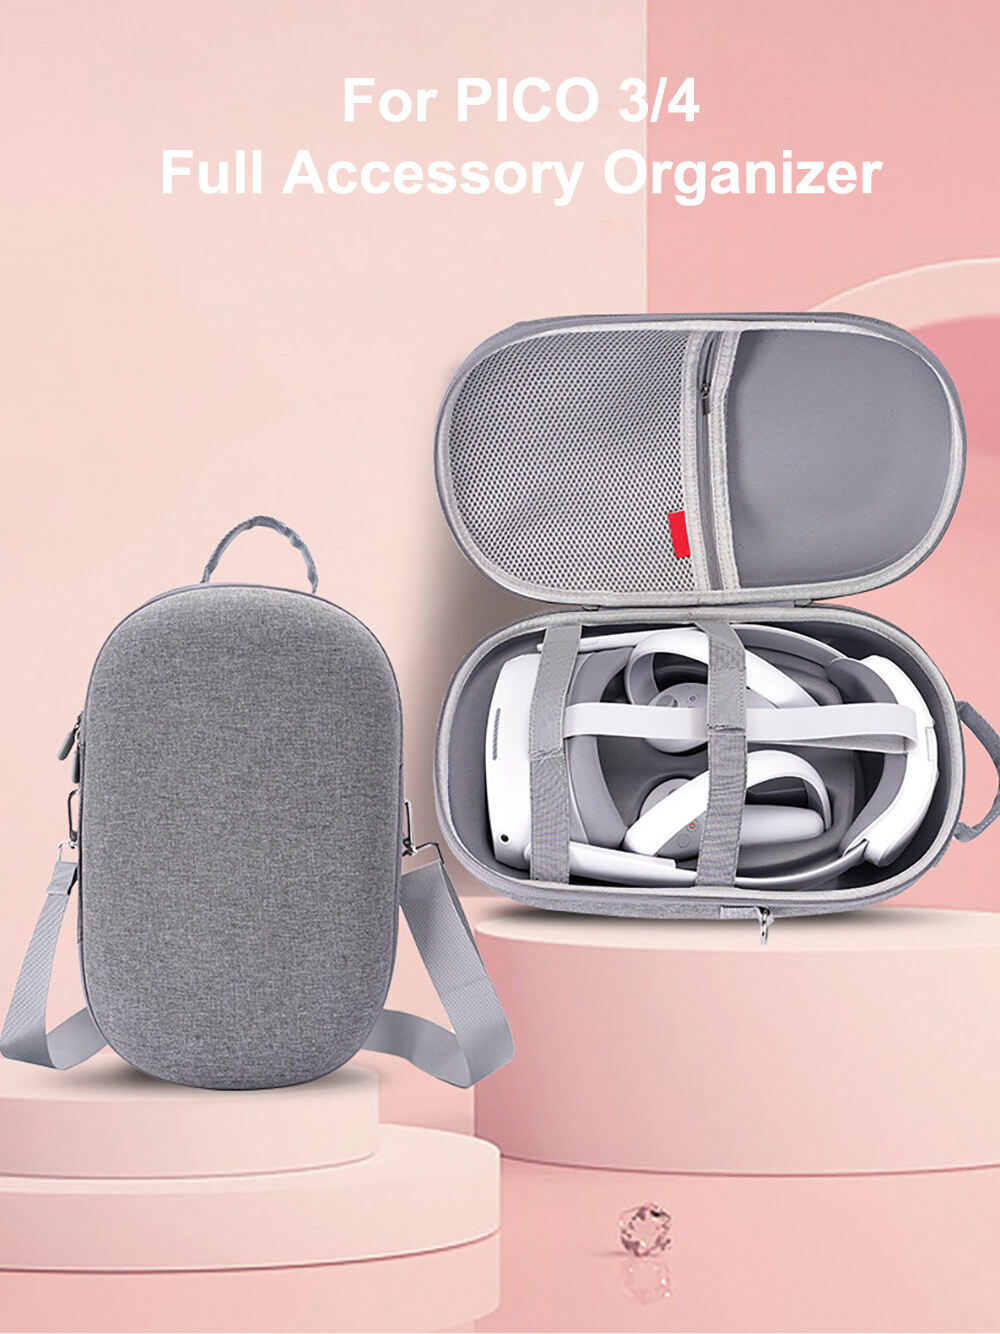 Eva Case Carry Travel Foam Portable For Pico 4 Pro Vr Neo3 G3 Eye Headset Battery Charging Dock Accessories details